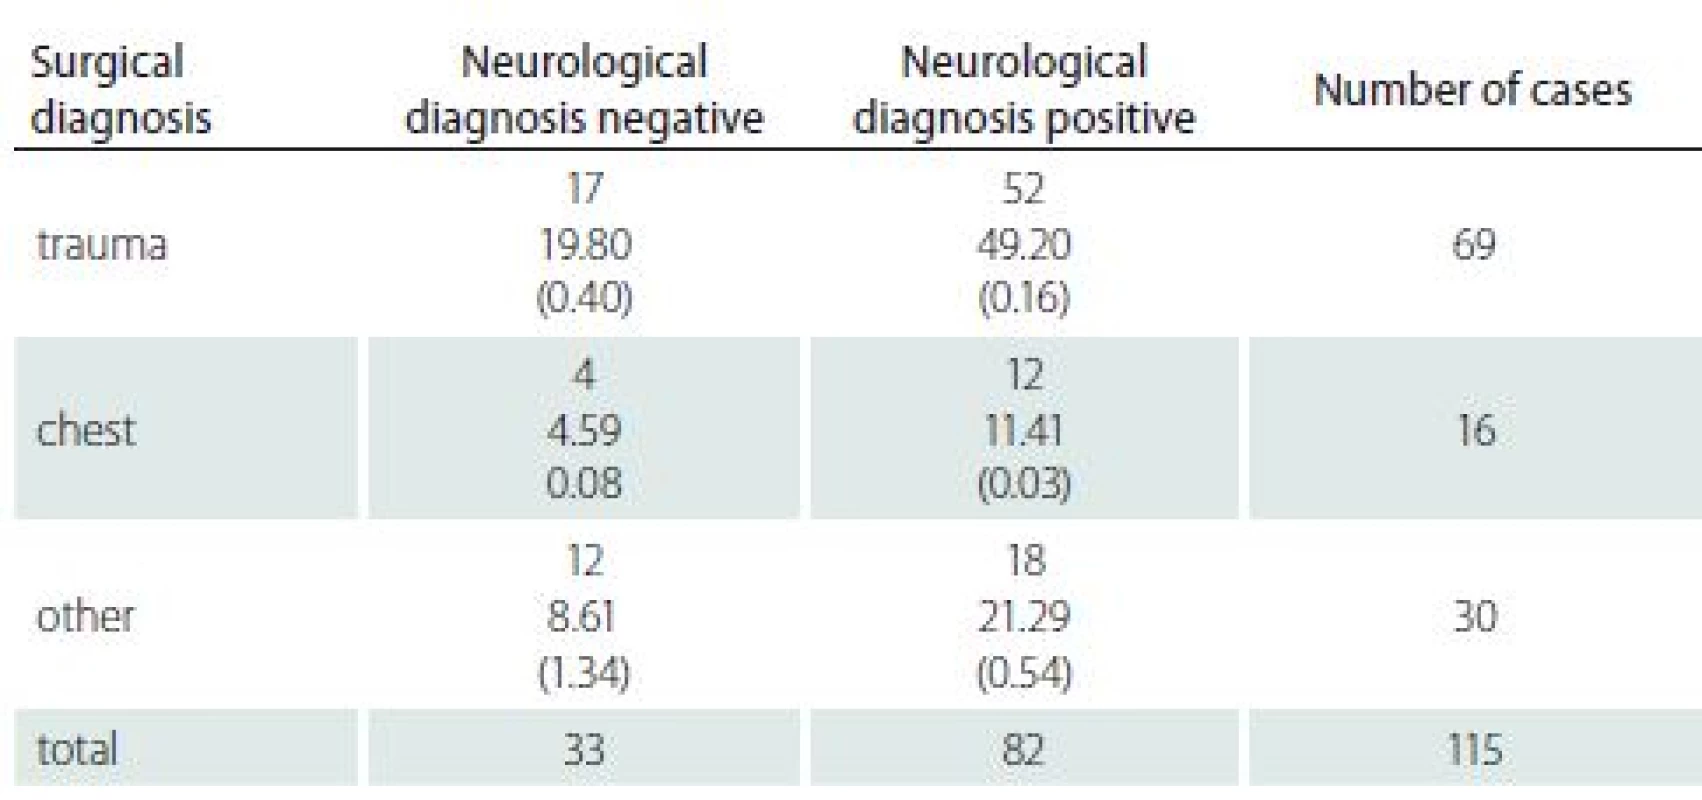 Relation of the neurological diagnose in history and surgical diagnose and
pressure ulcers. Χ<sup>2</sup> = 2.53, df = 2. Χ<sup>2</sup>/df =1.27, P (Χ<sup>2</sup> > 2.36) = 0.2814.